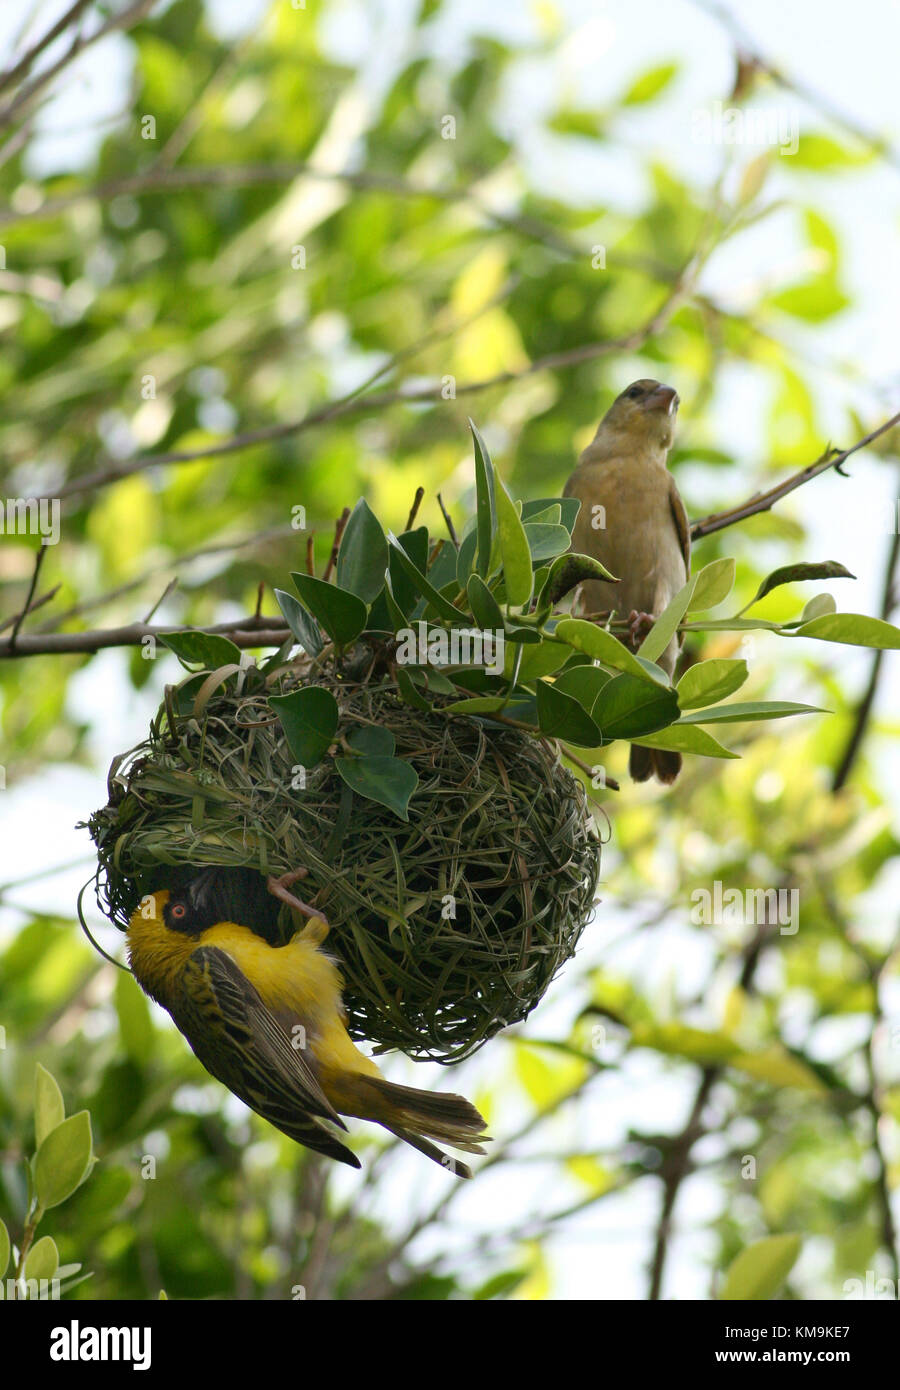 Male and female Masked Waver (Ploceus velatus) building a nest, South Africa Stock Photo